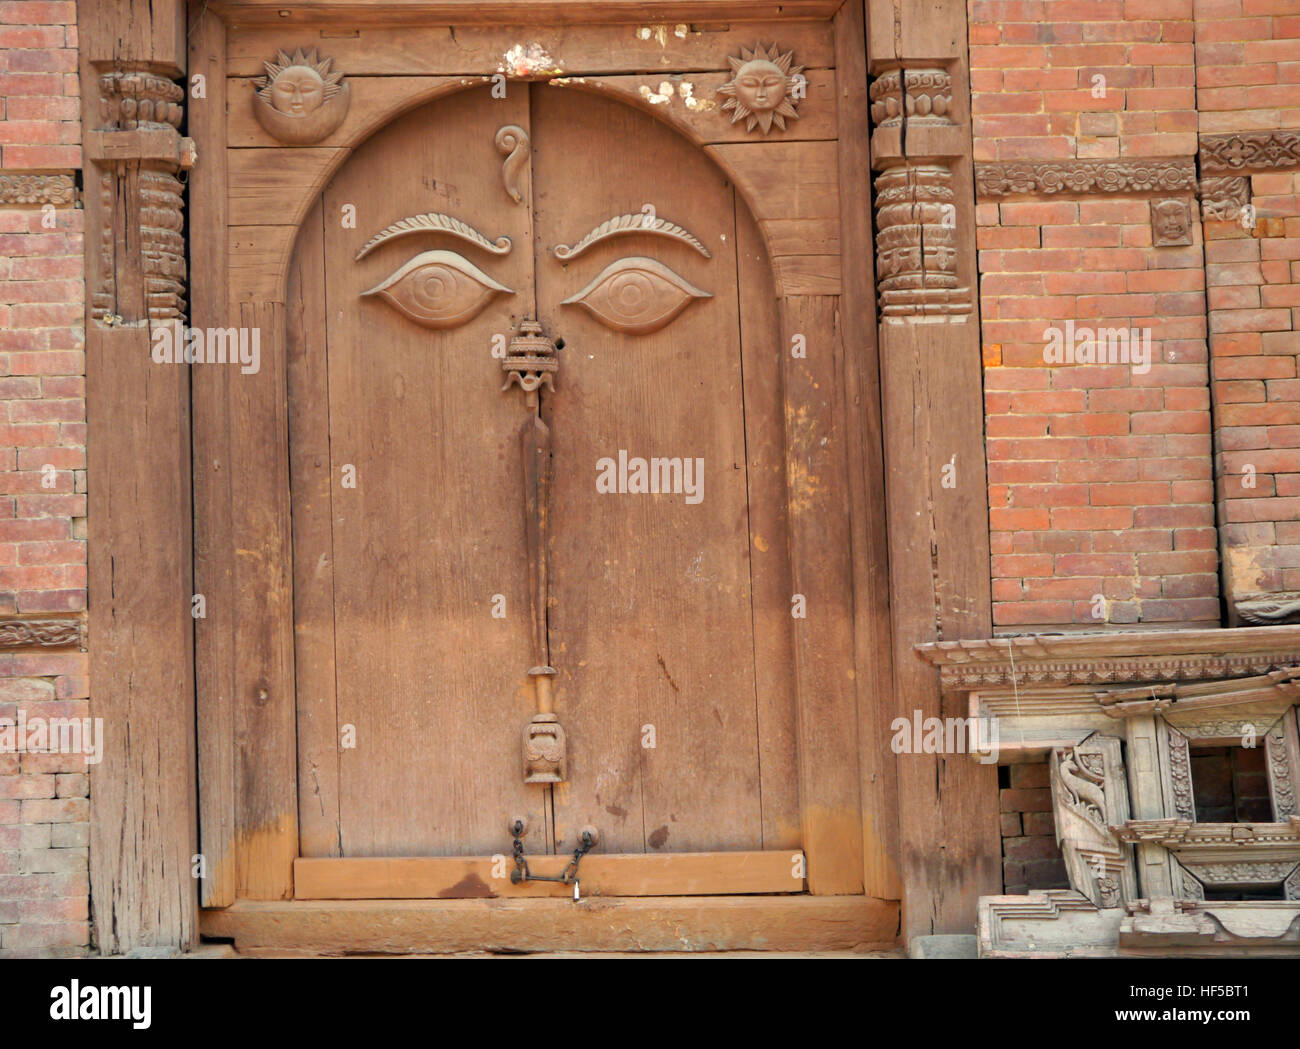 Wooden Carving on Door of the Buddha's all Seeing Eyes in the Hanuman Dhoka Durbar Square Museum in Kathmandu, Nepal.Asia. Stock Photo